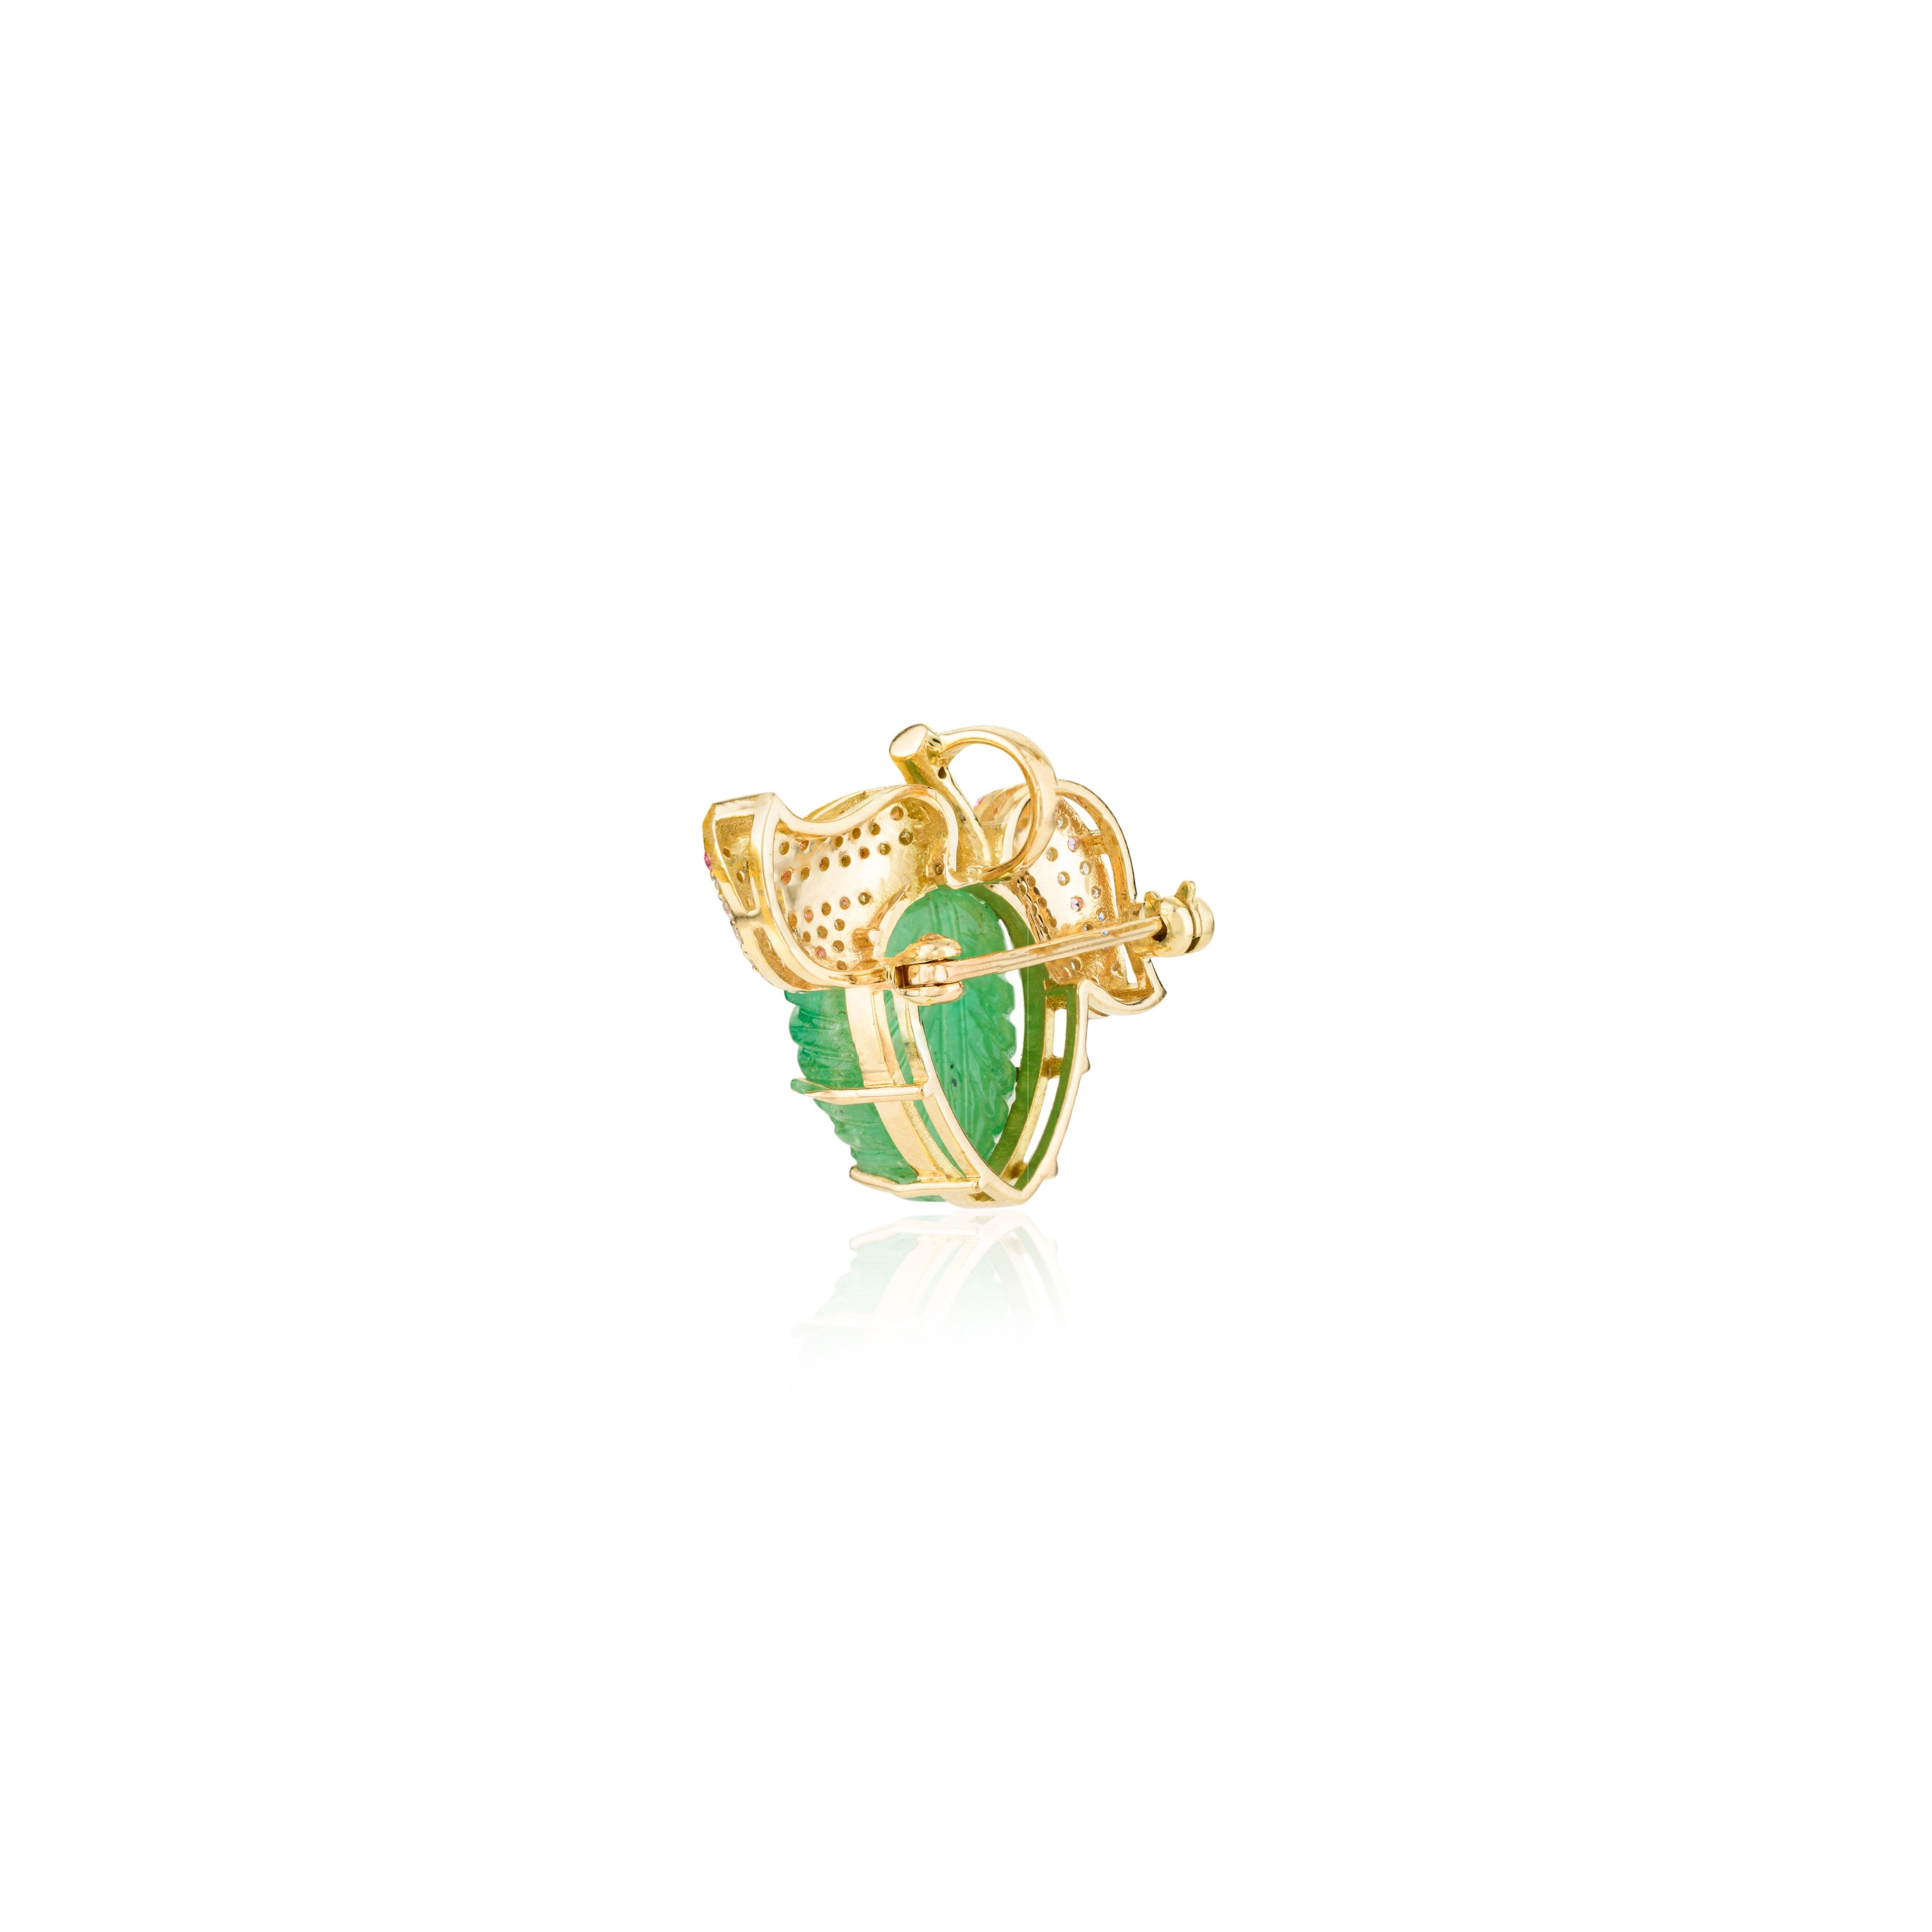 18K Solid Yellow Gold  8.88 Carat Carved Leaf Emerald Brooch Pin